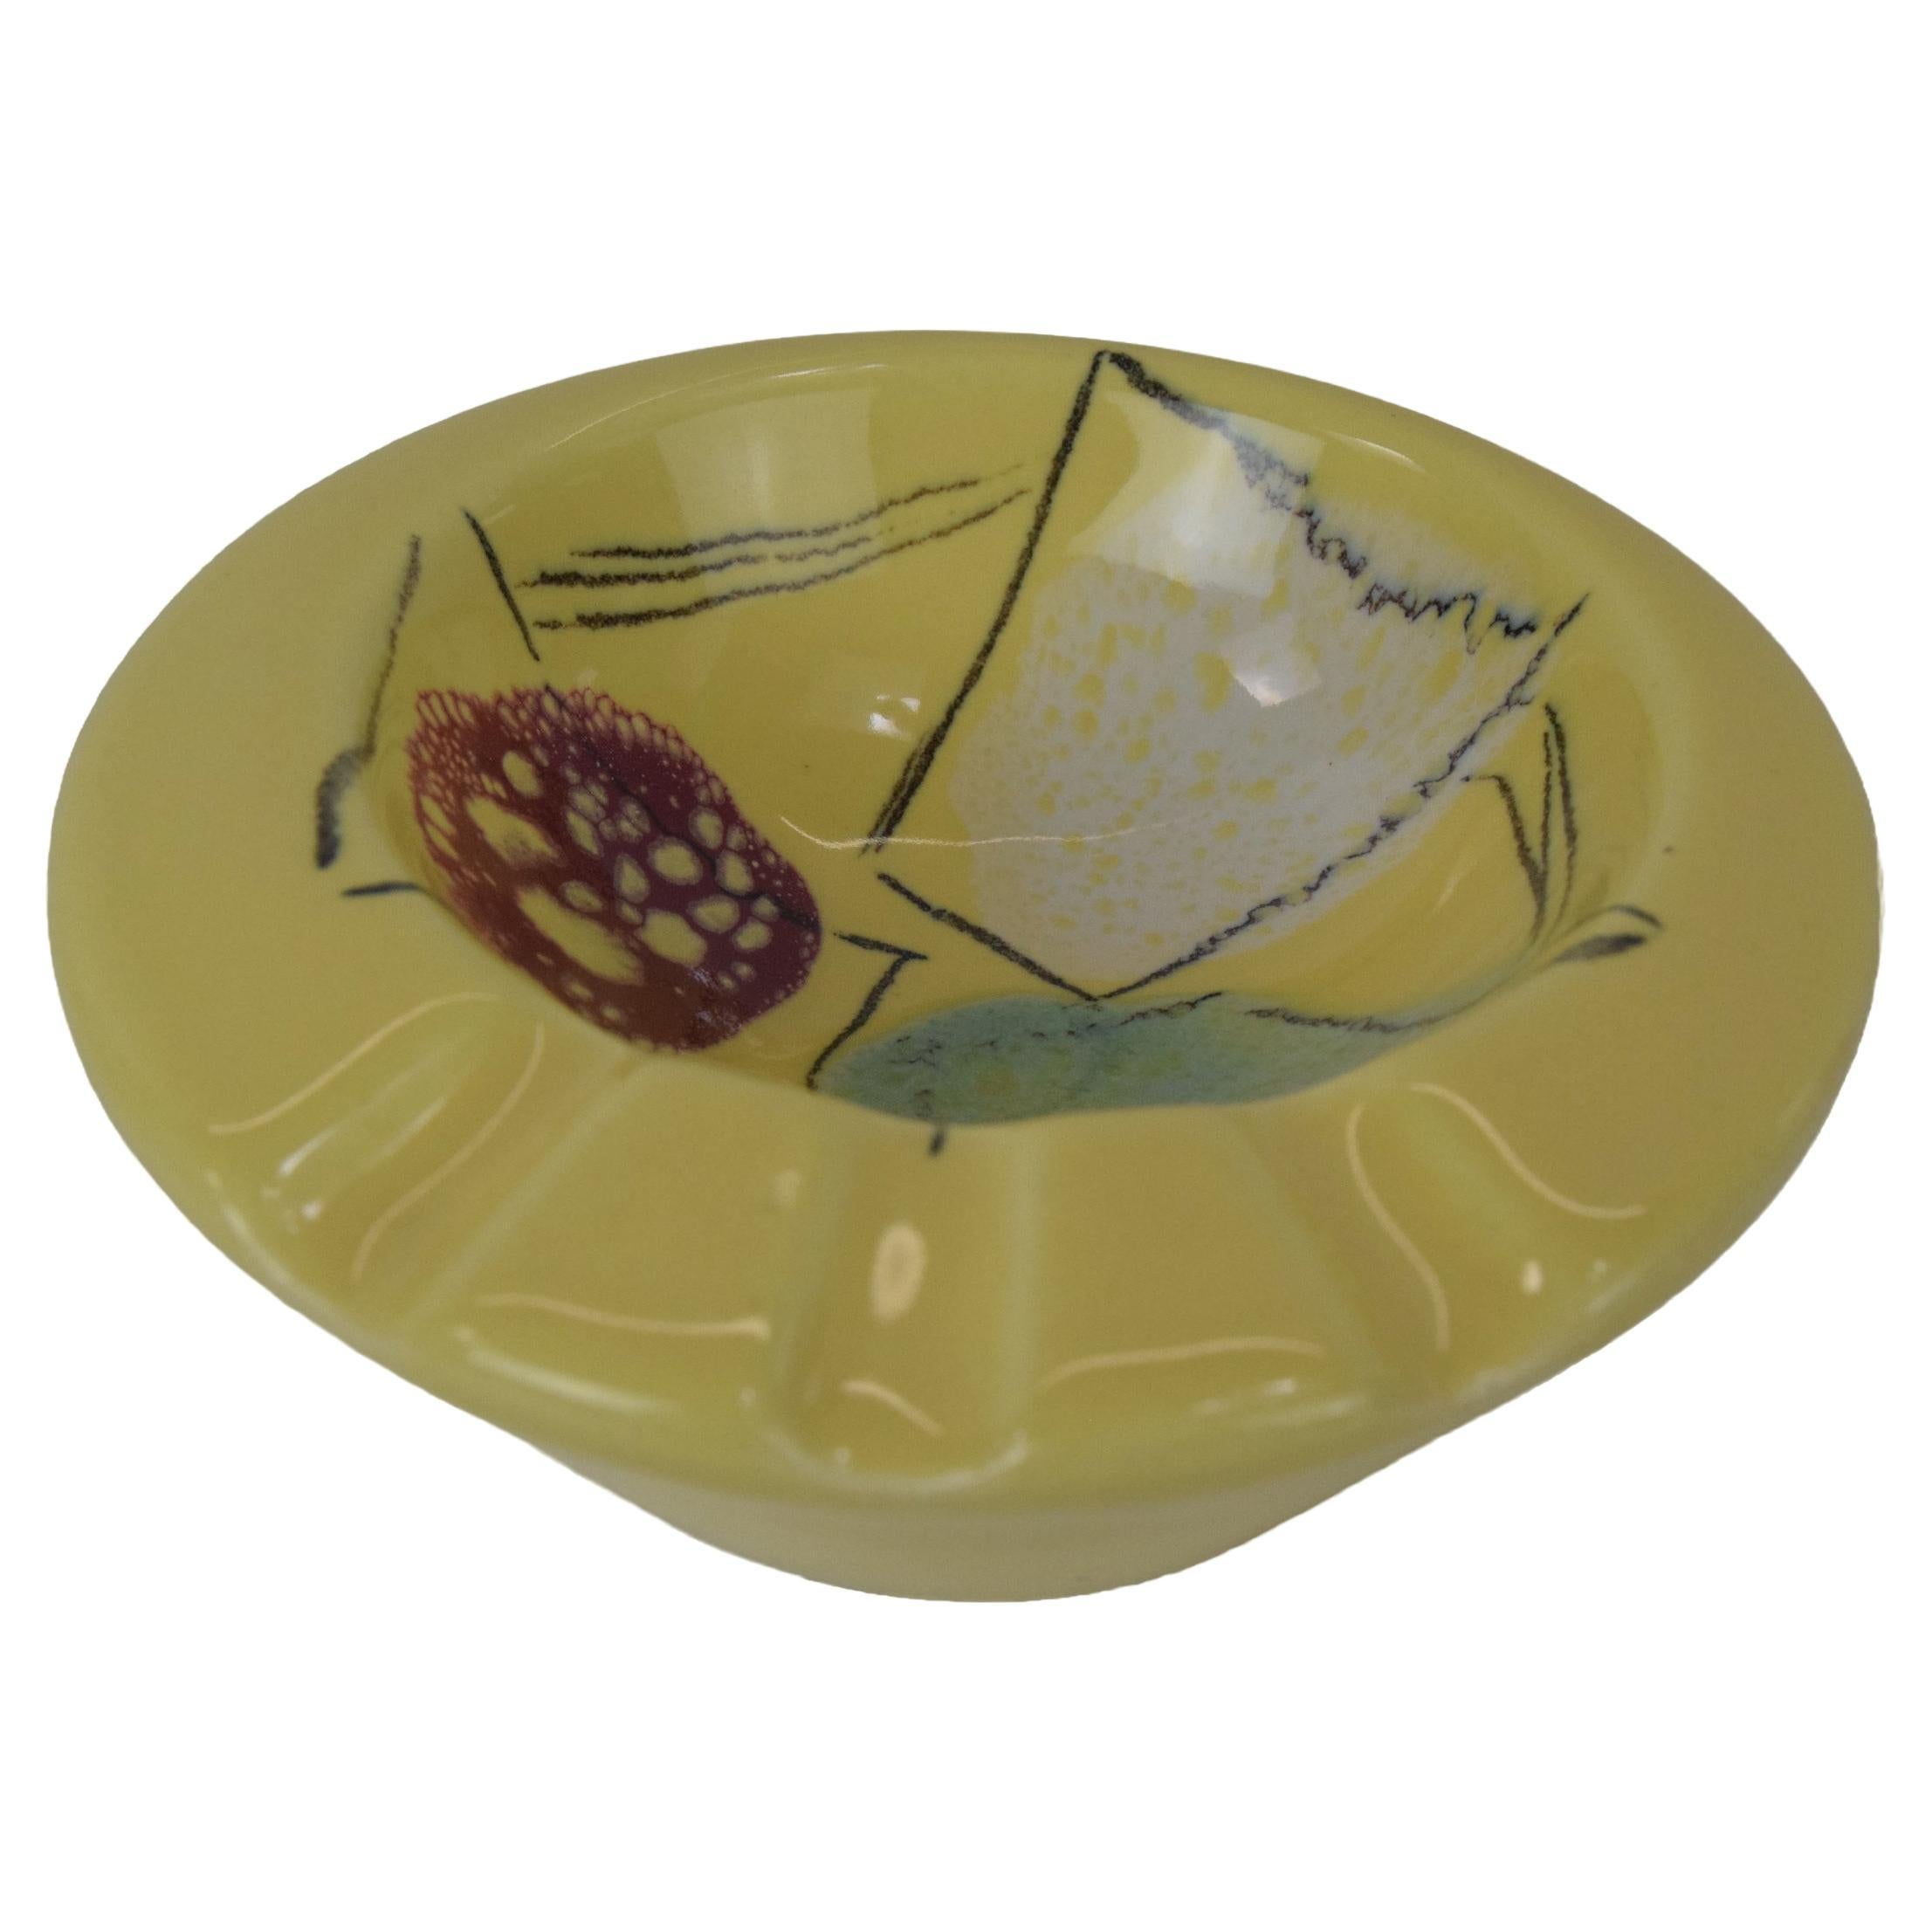 Mid-century Design Ashtray by Ditmar Urbach, 1970's.  For Sale